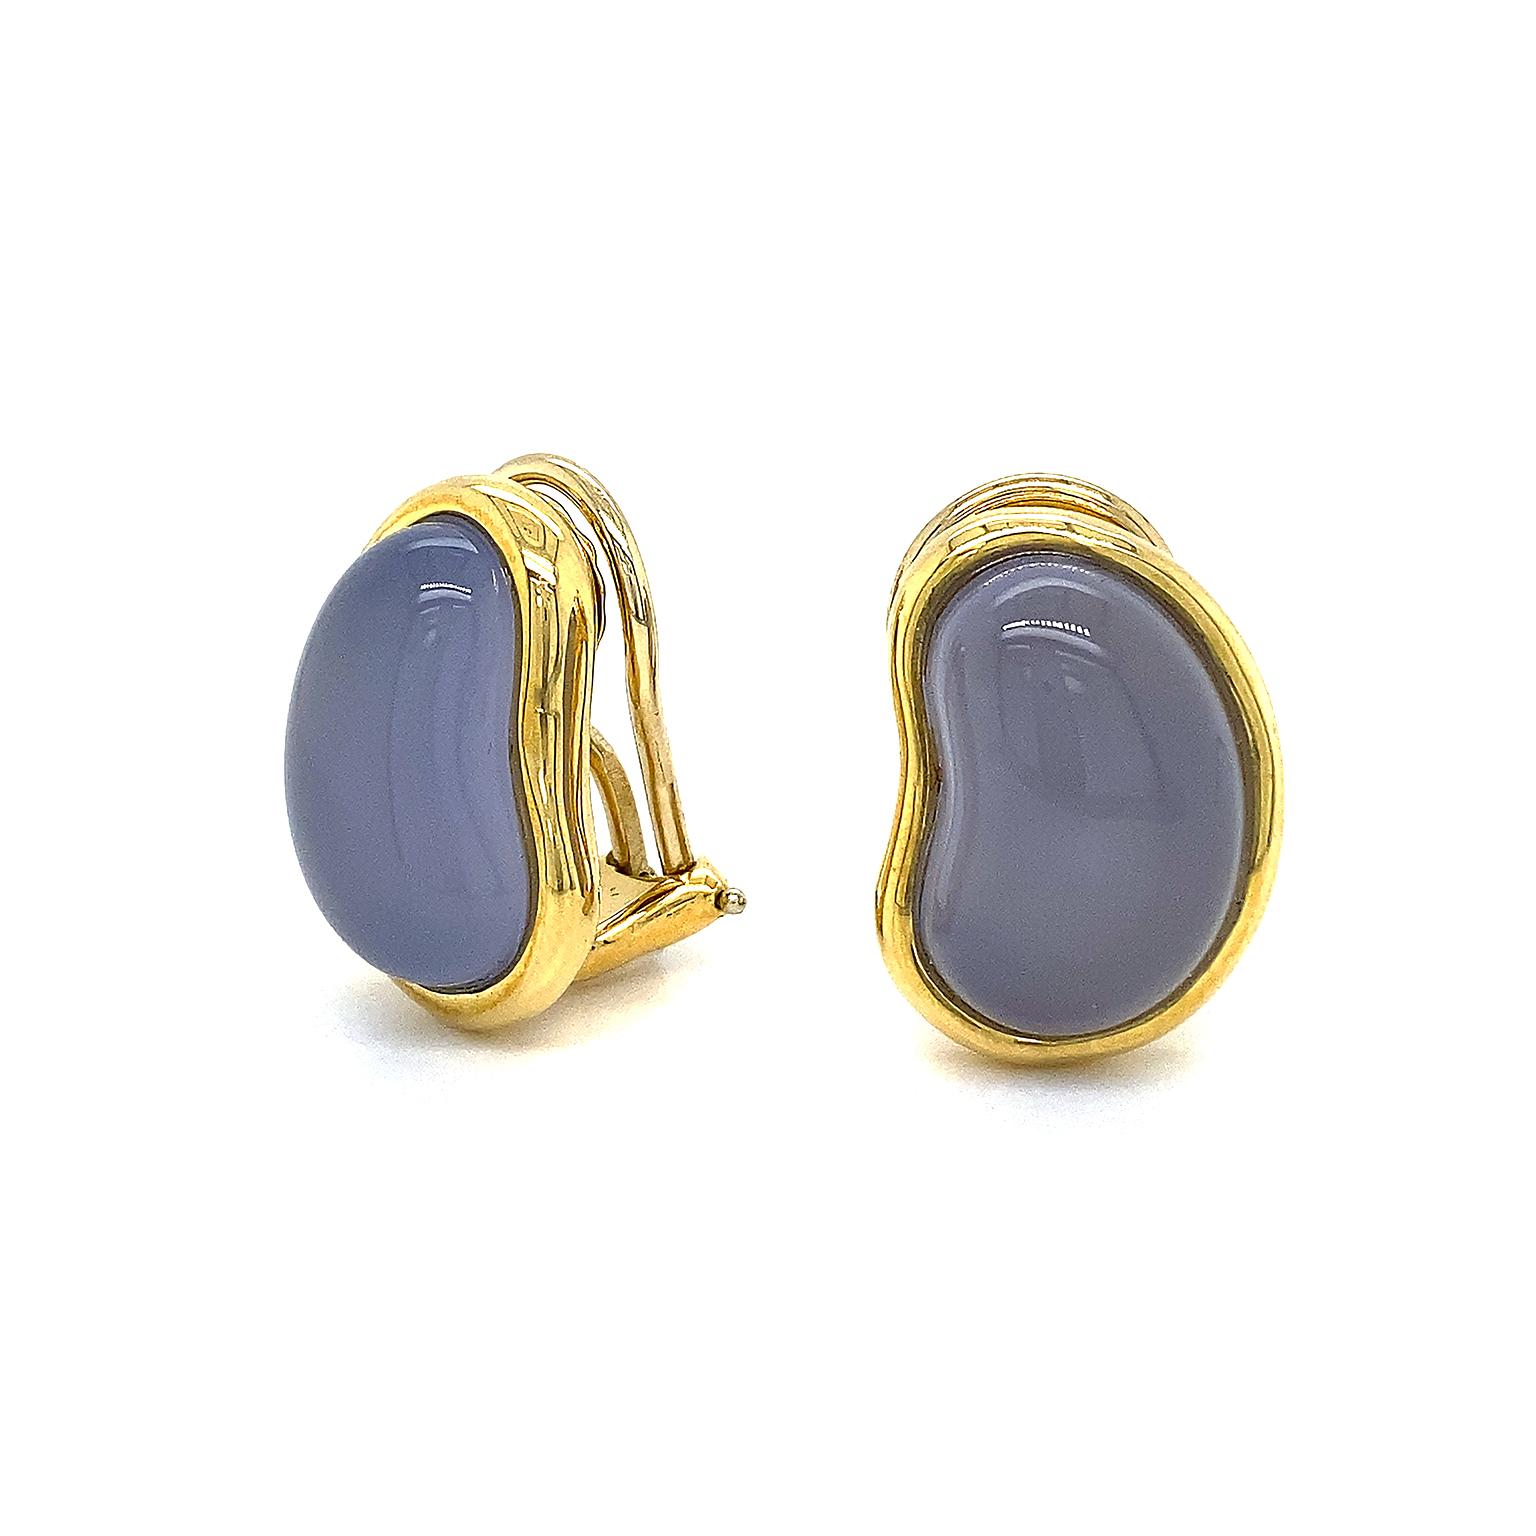 Distinct blue gray tones of chalcedony are highlighted in a bean-shaped carving. The curve of the crystalline gemstone is turned inward. Set in 18k yellow gold, a touch of color and shimmer accentuates the chalcedony. The clip-back earrings measure